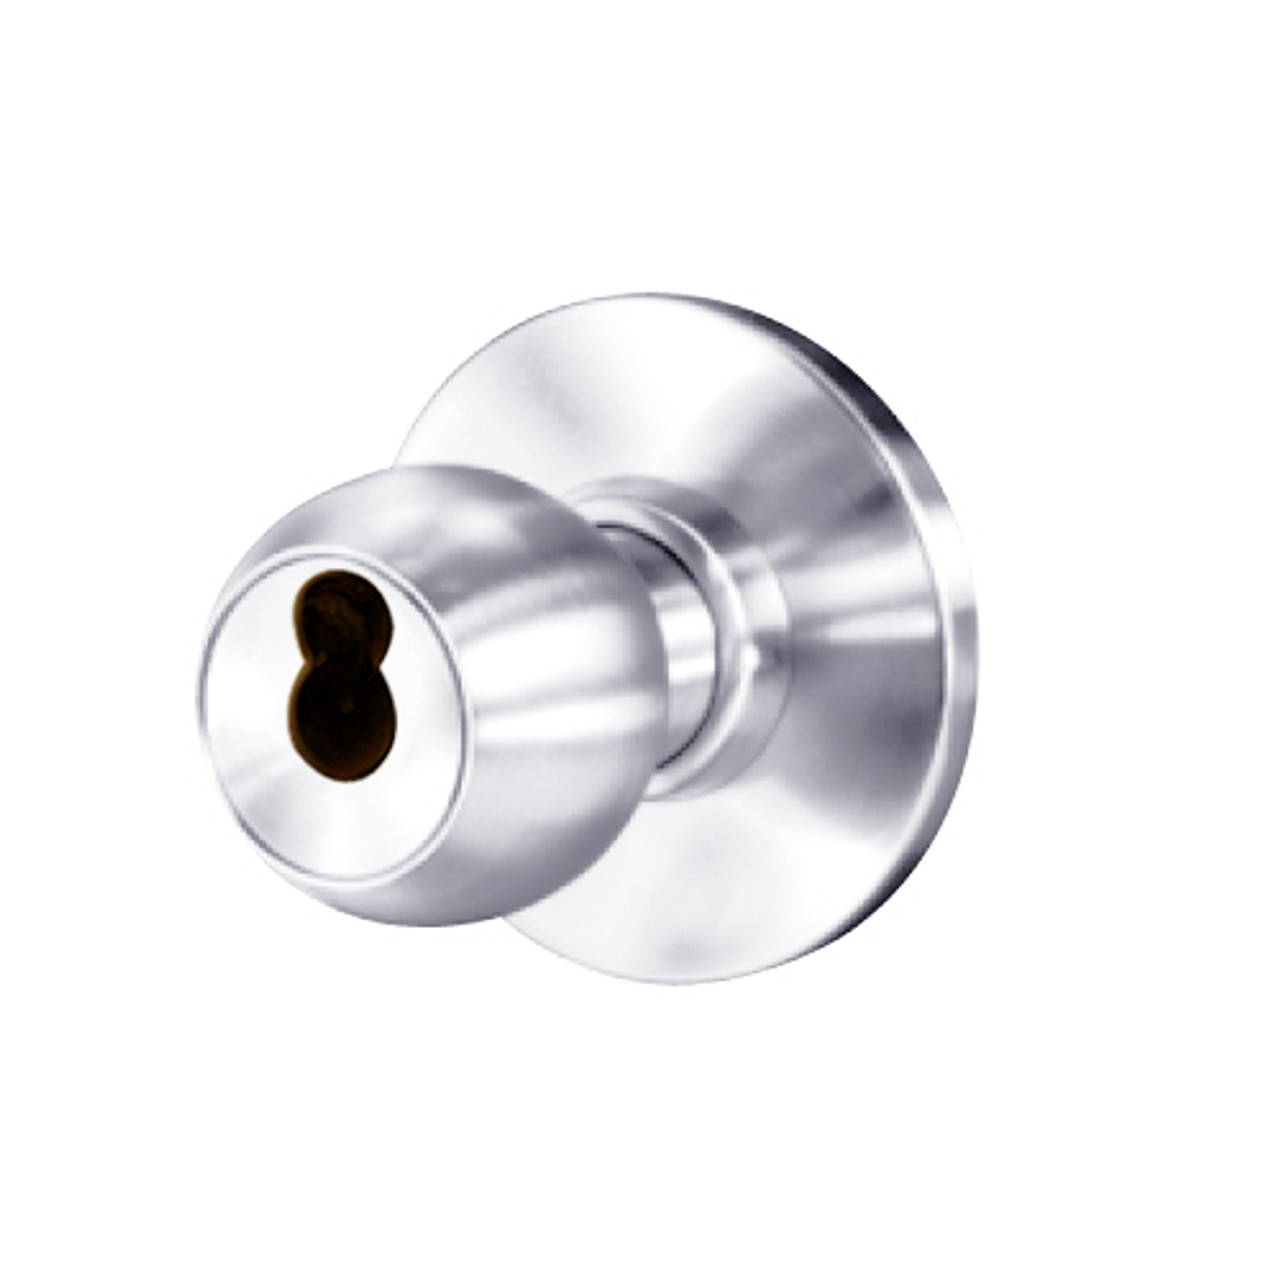 8K37XR4AS3625 Best 8K Series Special Heavy Duty Cylindrical Knob Locks with Round Style in Bright Chrome